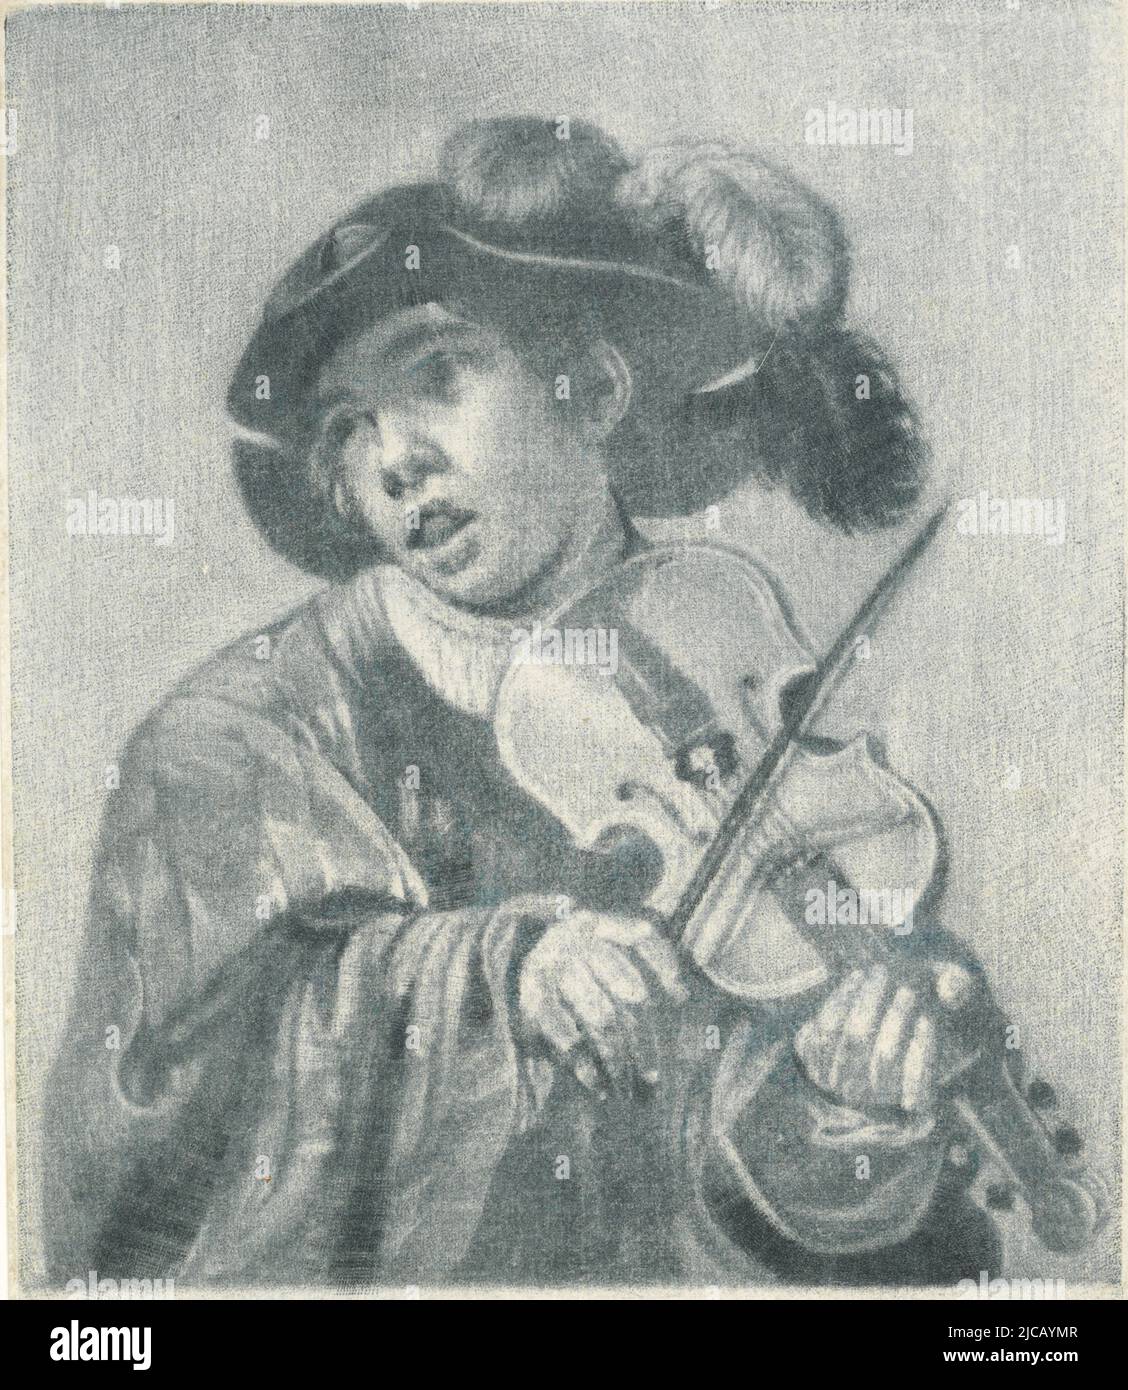 A boy, wearing a feathered hat on his head, plays a violin, Violin Player, print maker: Dirk Koedijck, (mentioned on object), after: Hendrick ter Brugghen, (mentioned on object), Zaandam, 1730, paper, h 168 mm × w 125 mm Stock Photo